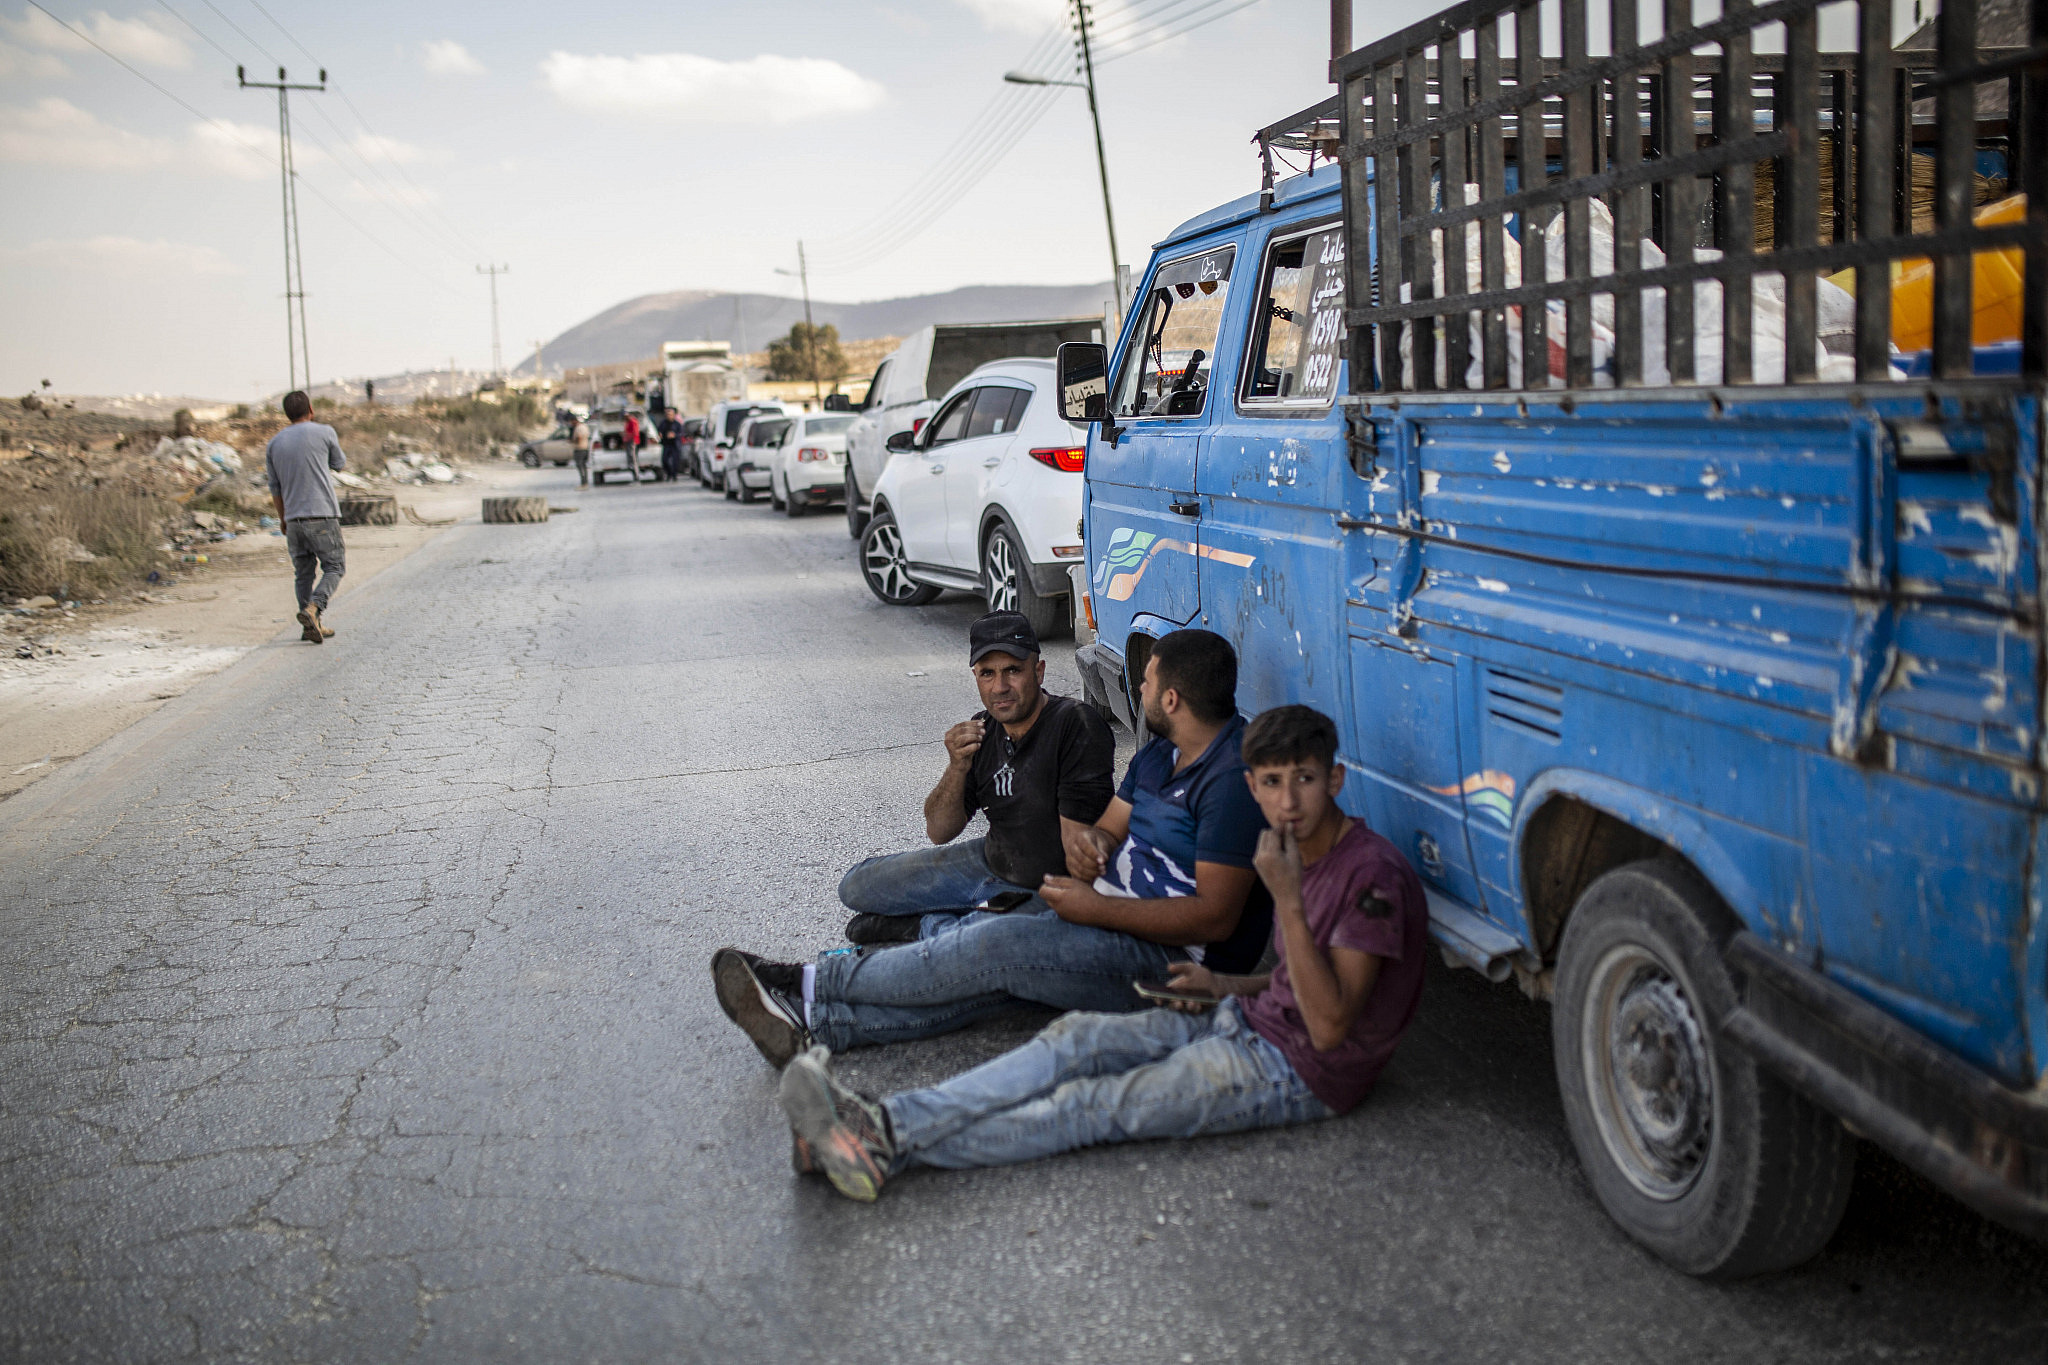 Palestinians sit on the road while waiting to pass through the Israeli military checkpoint in the village of Beit Furik, near Nablus, occupied West Bank, October 20, 2022. (Anne Paq/Activestills)